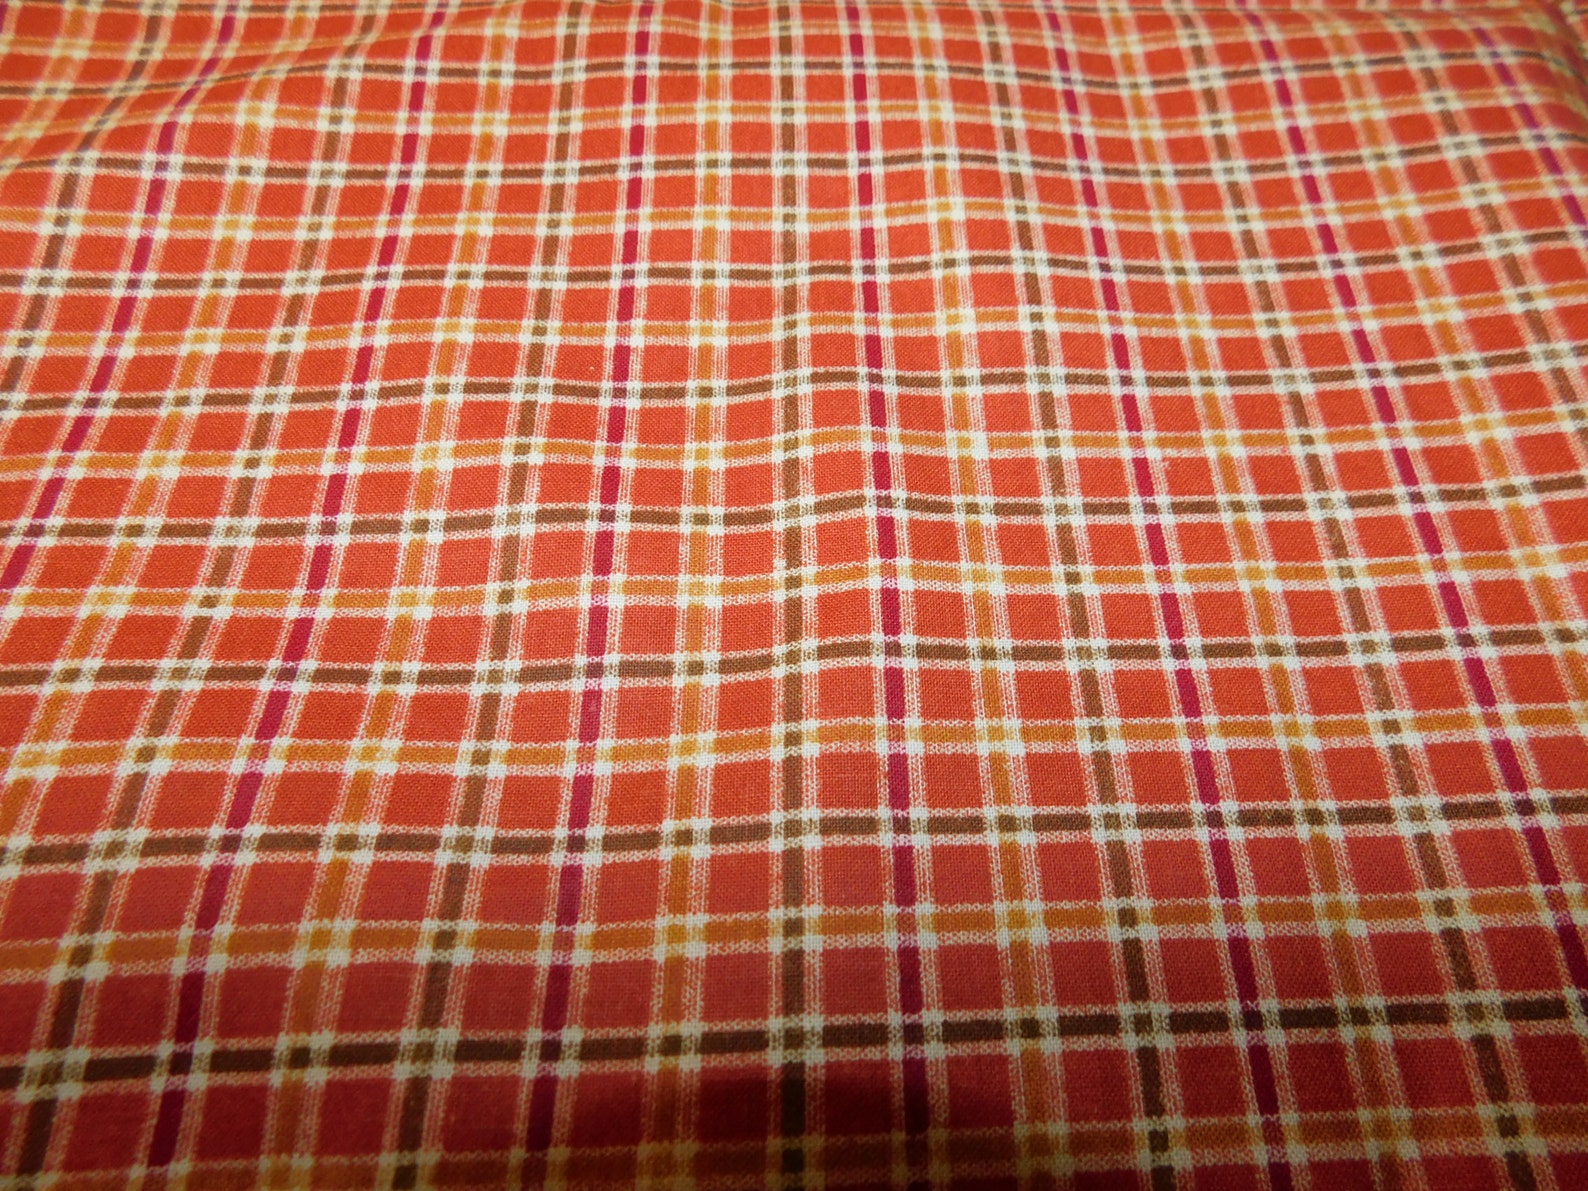 Orange Checkered Plaid Fabric 31 inches by 44 inches | Etsy